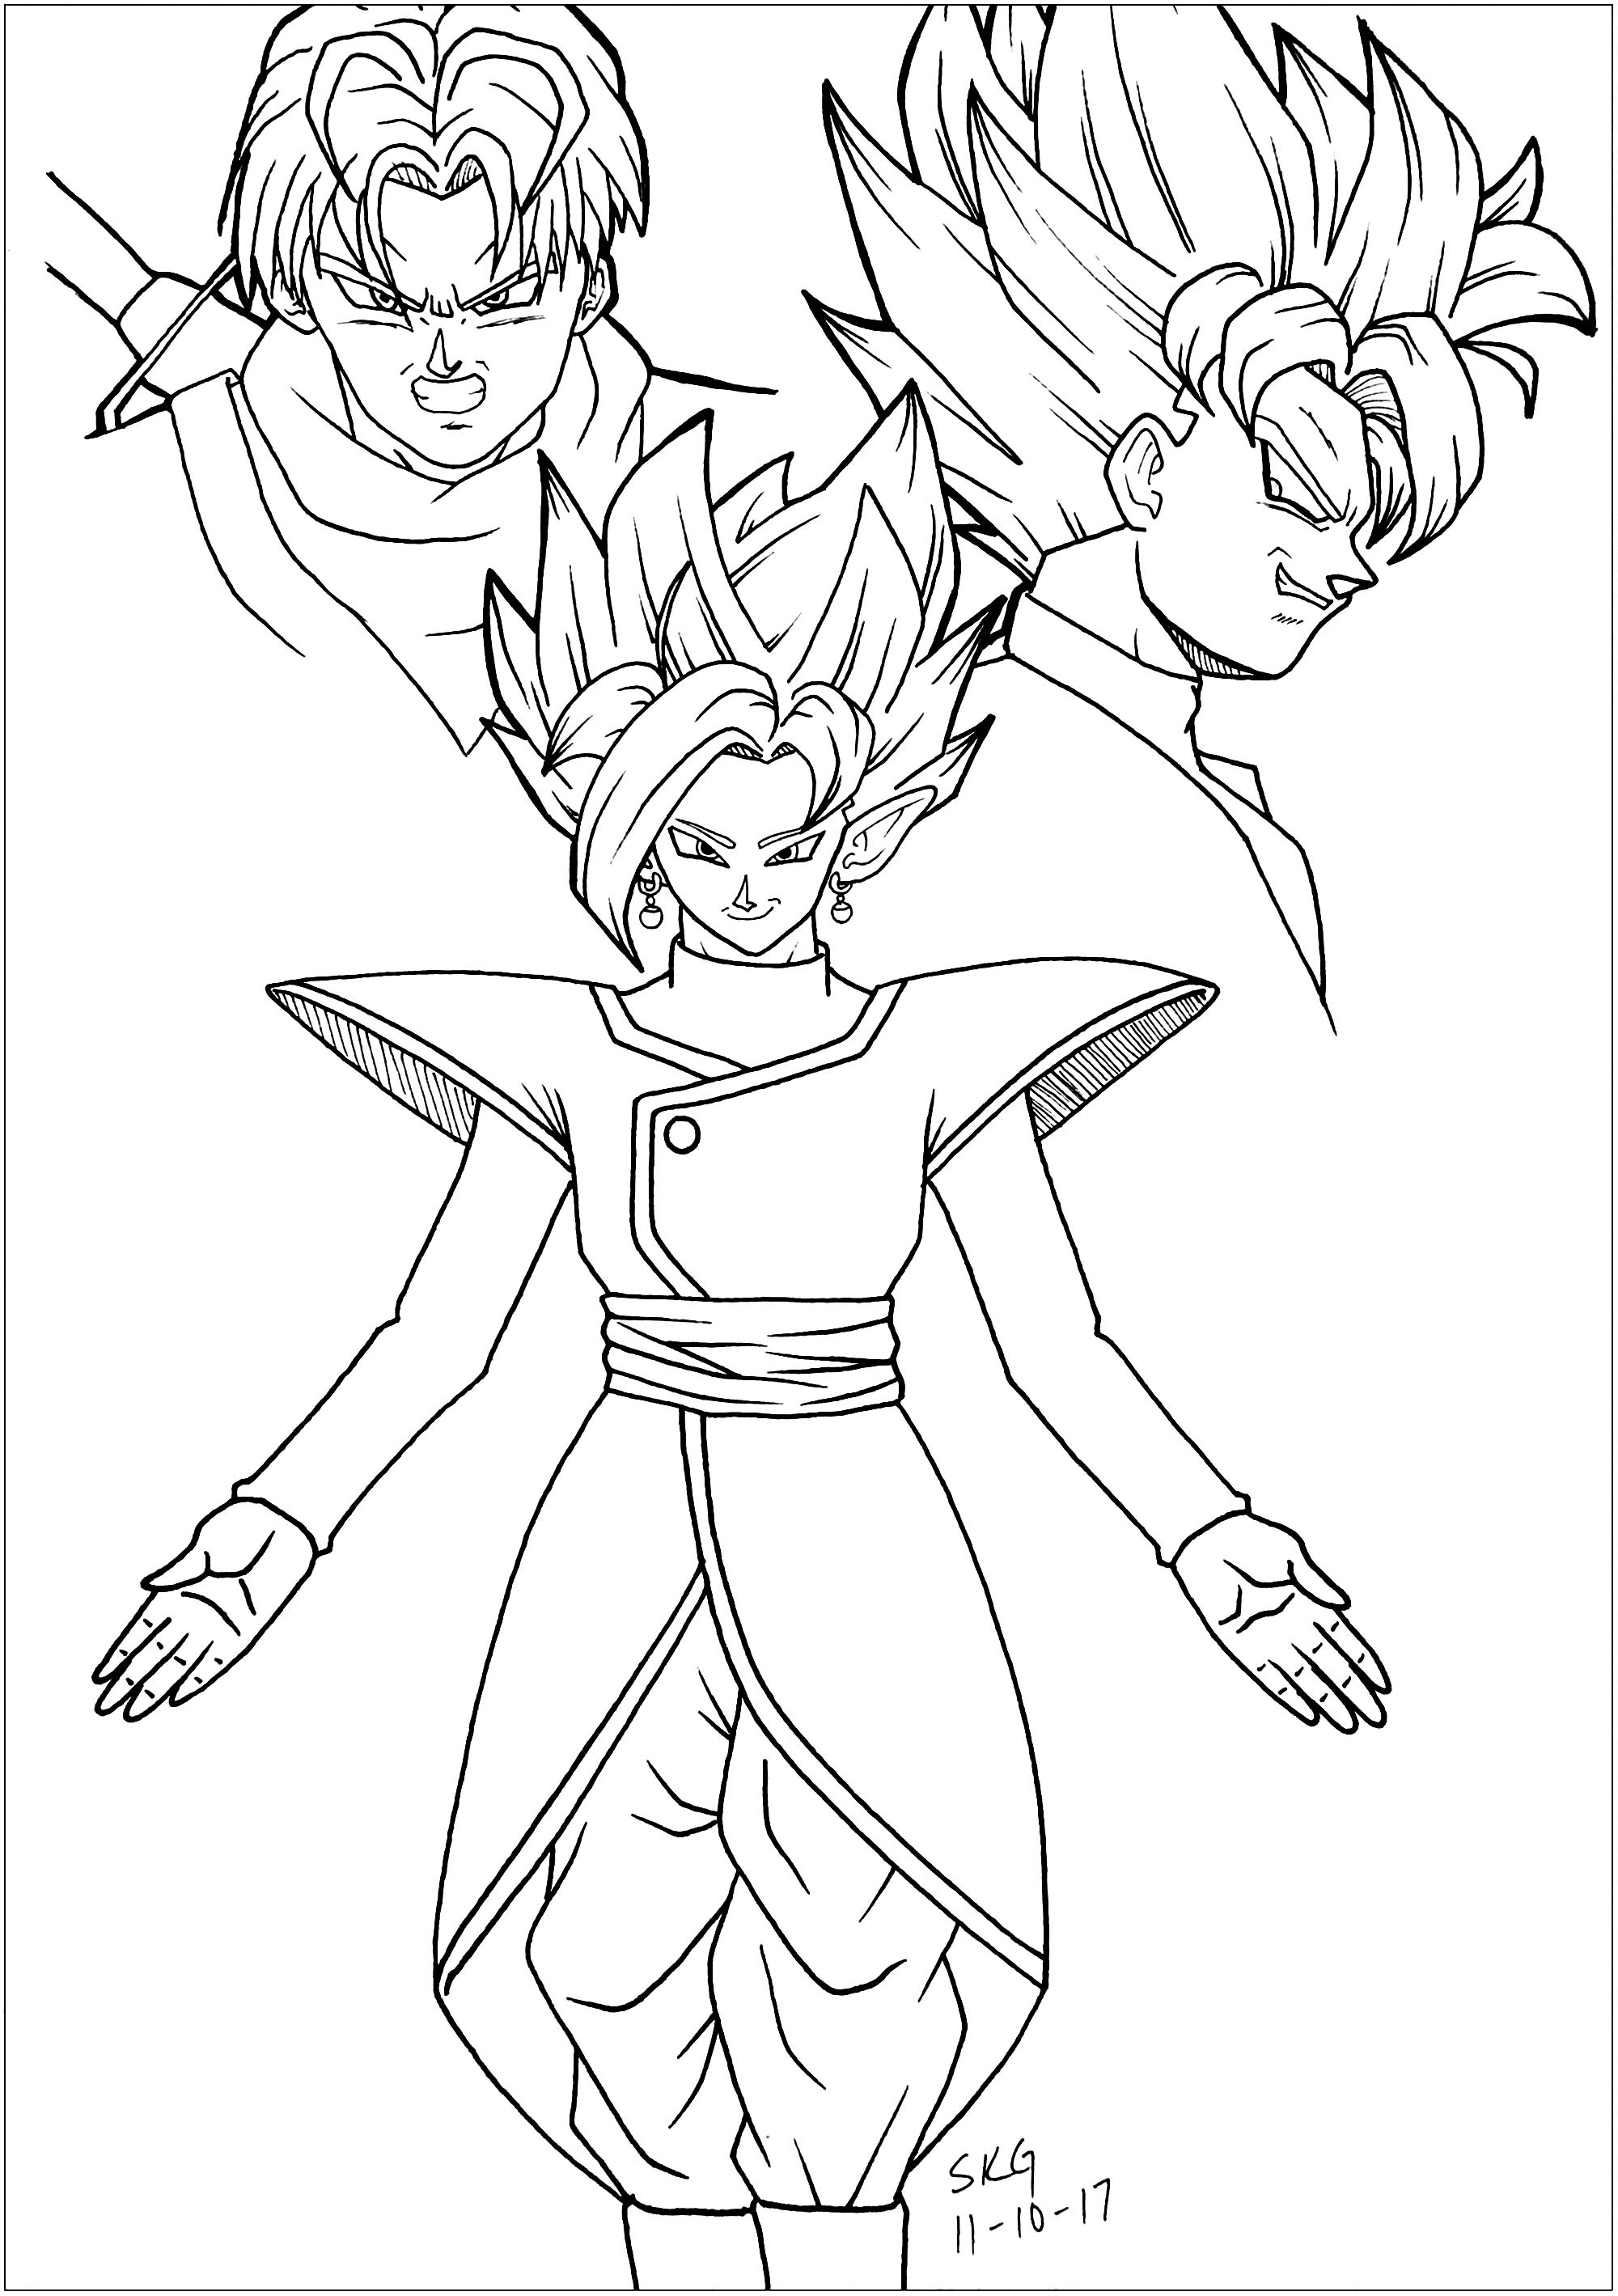 Coloring Pages Kid Goku Goku coloring pages / Beautiful dragon ball z